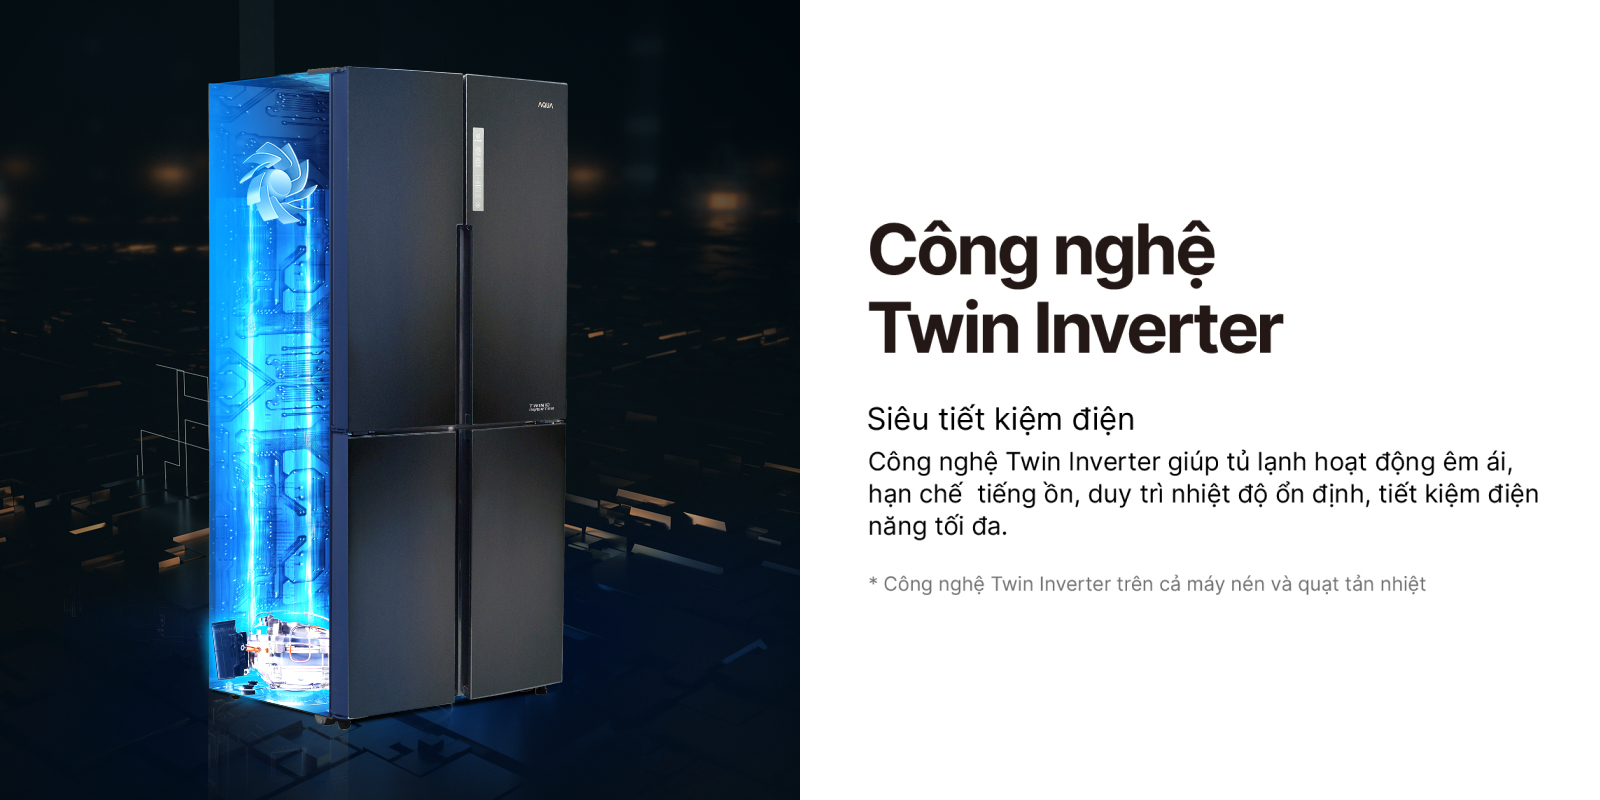 Cong nghe Twin Inverter